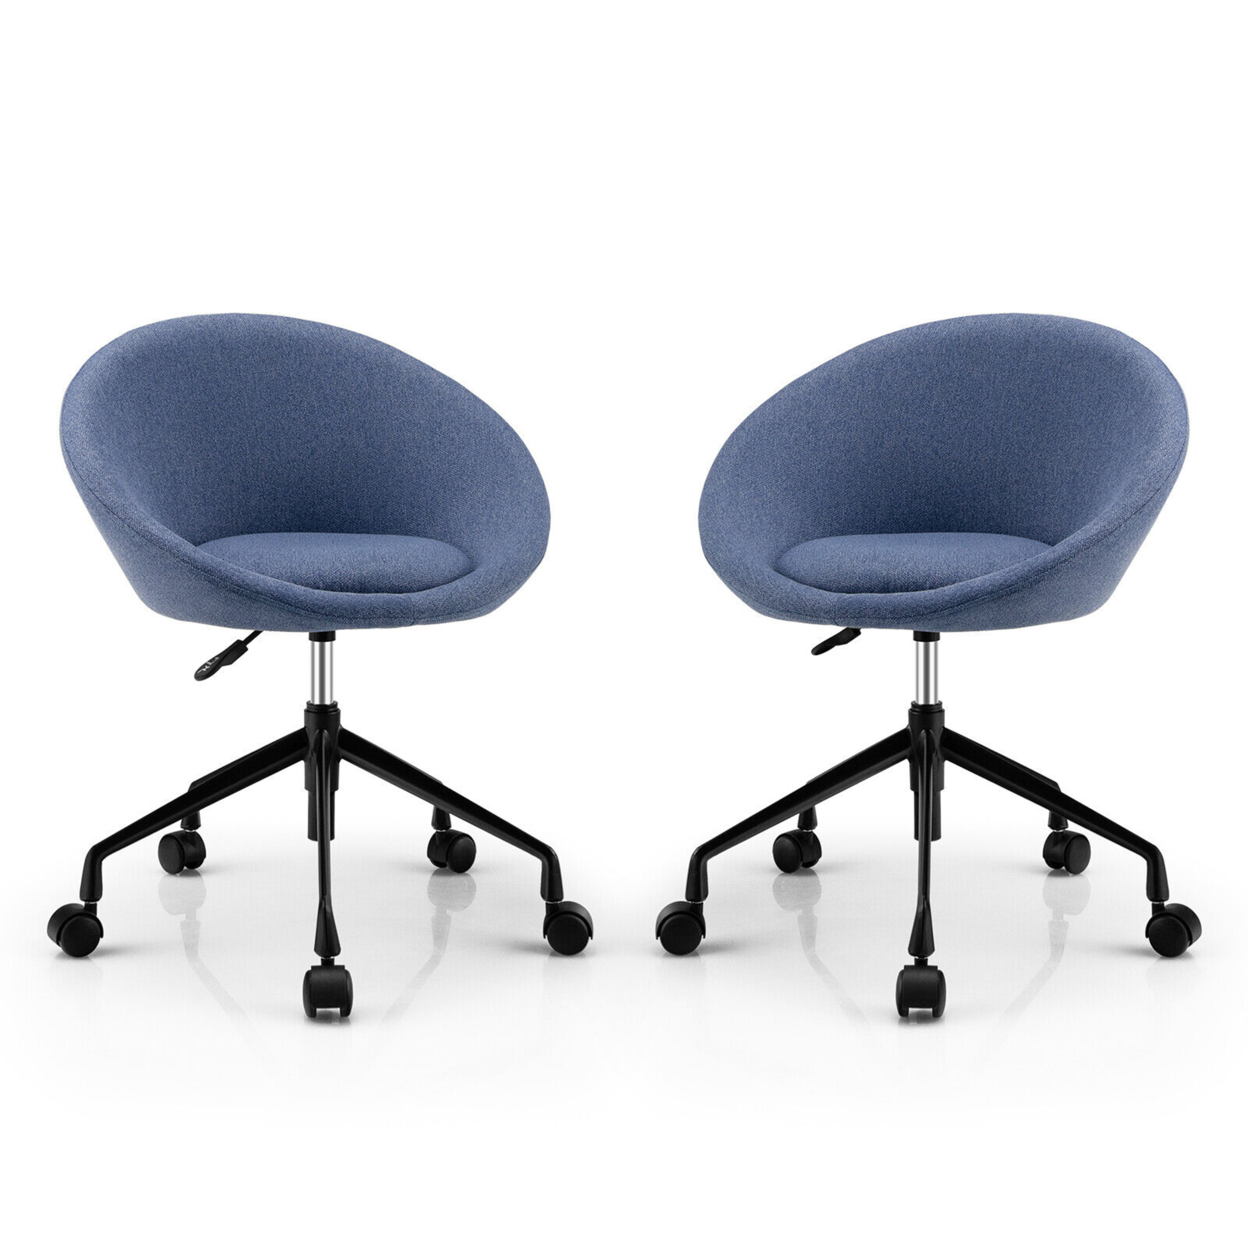 Set Of 2 Swivel Home Office Chair Adjustable Accent Chair W/ Flexible Casters - Blue